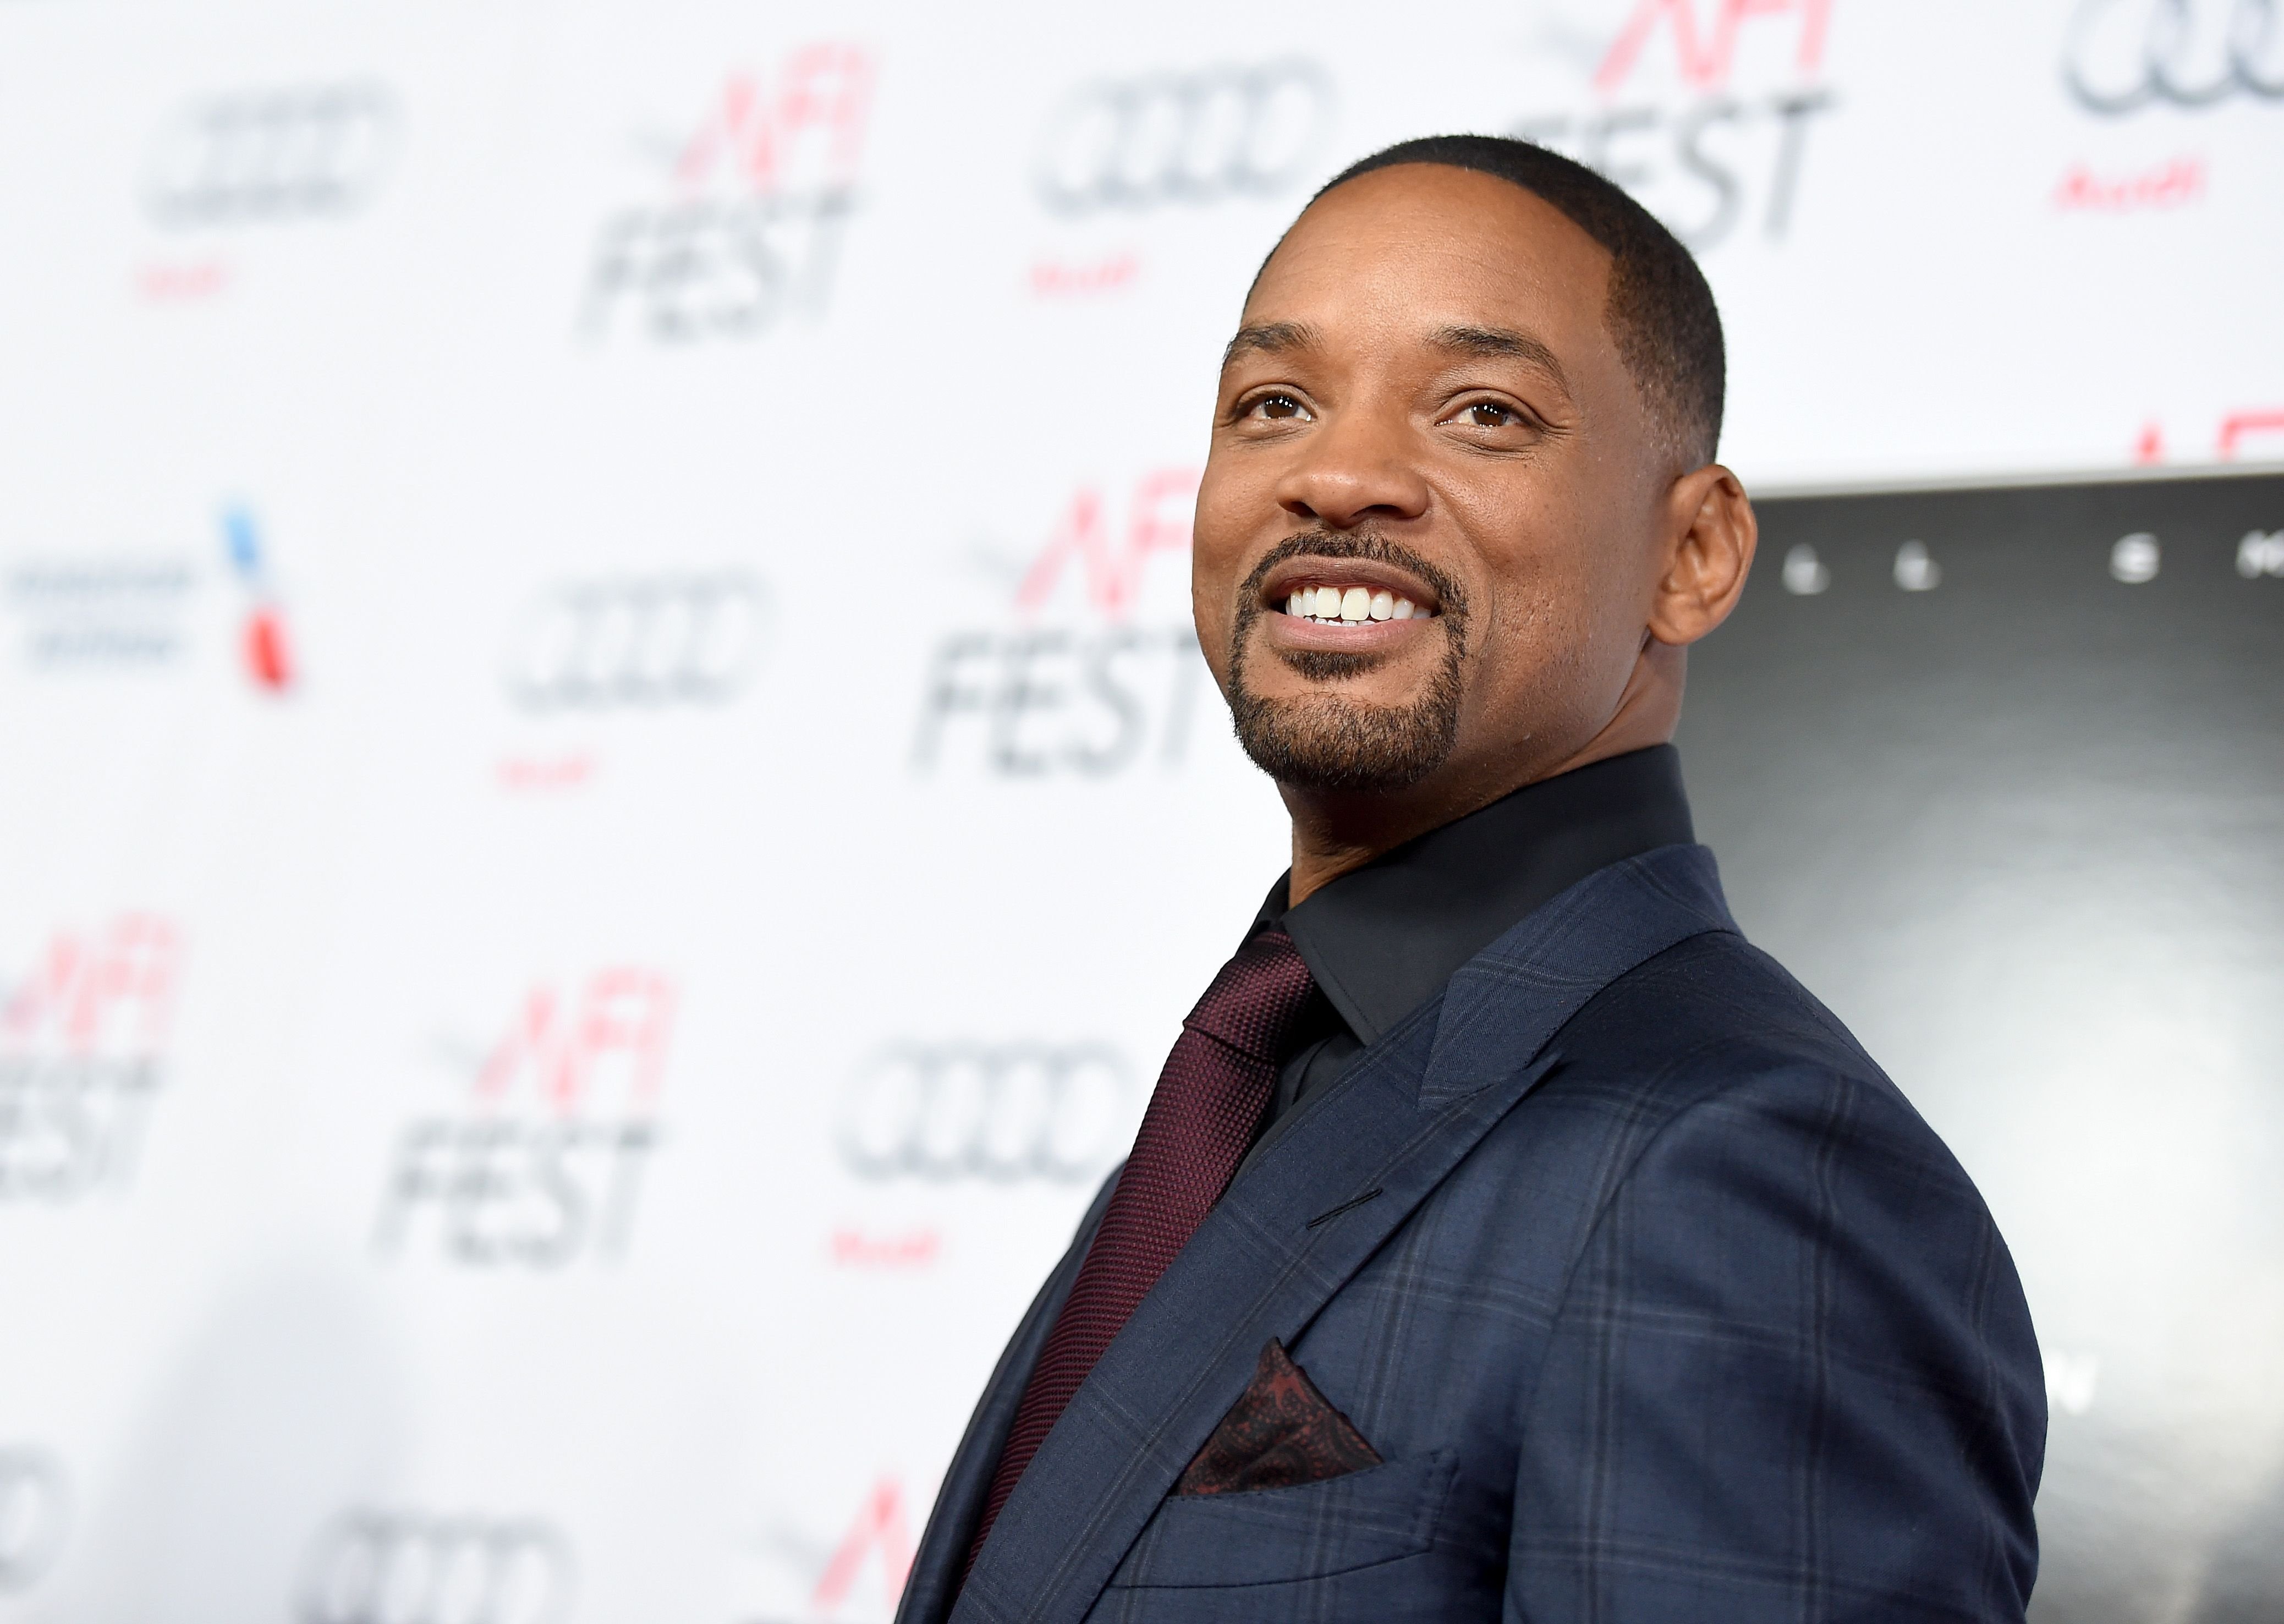 Will Smith attends the premiere of' "Concussion" during the AFI FEST 2015 on November 10, 2015. | Photo: Getty Images